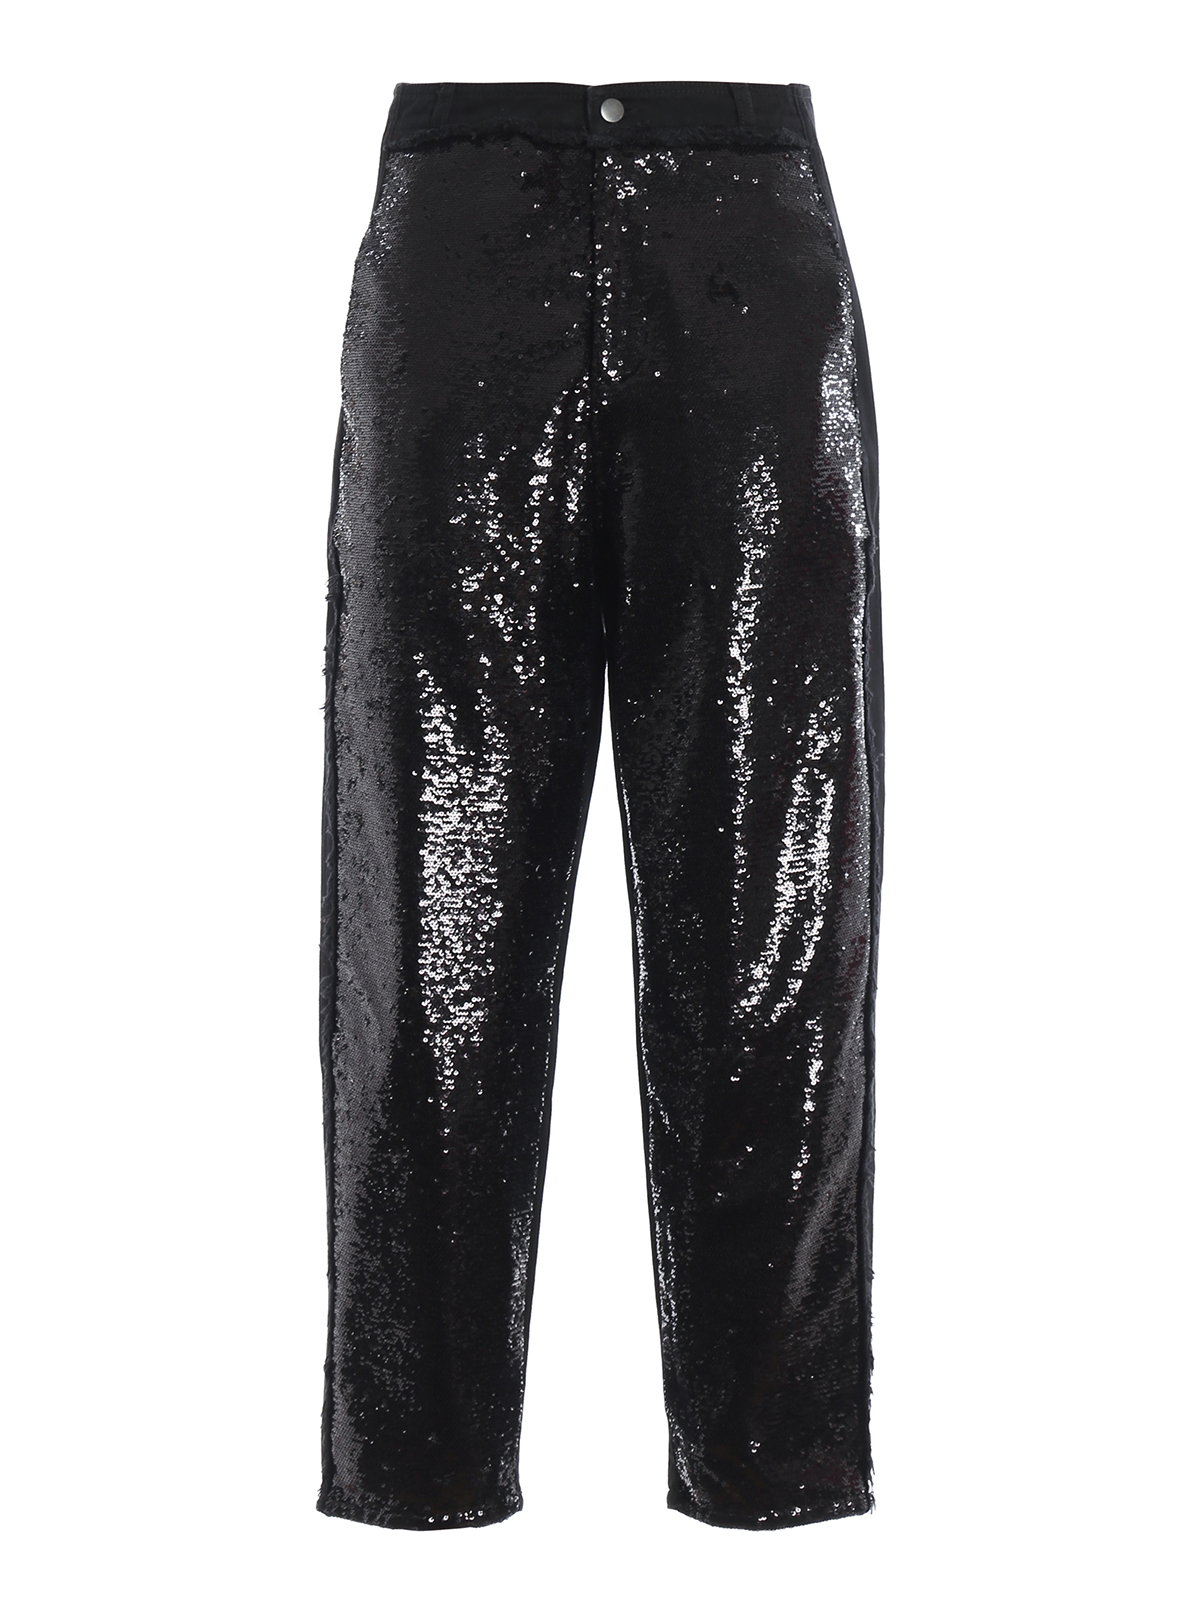 PHILOSOPHY DI LORENZO SERAFINI COTTON DRILL SEQUIN EMBELLISHED SLOUCHY PANTS